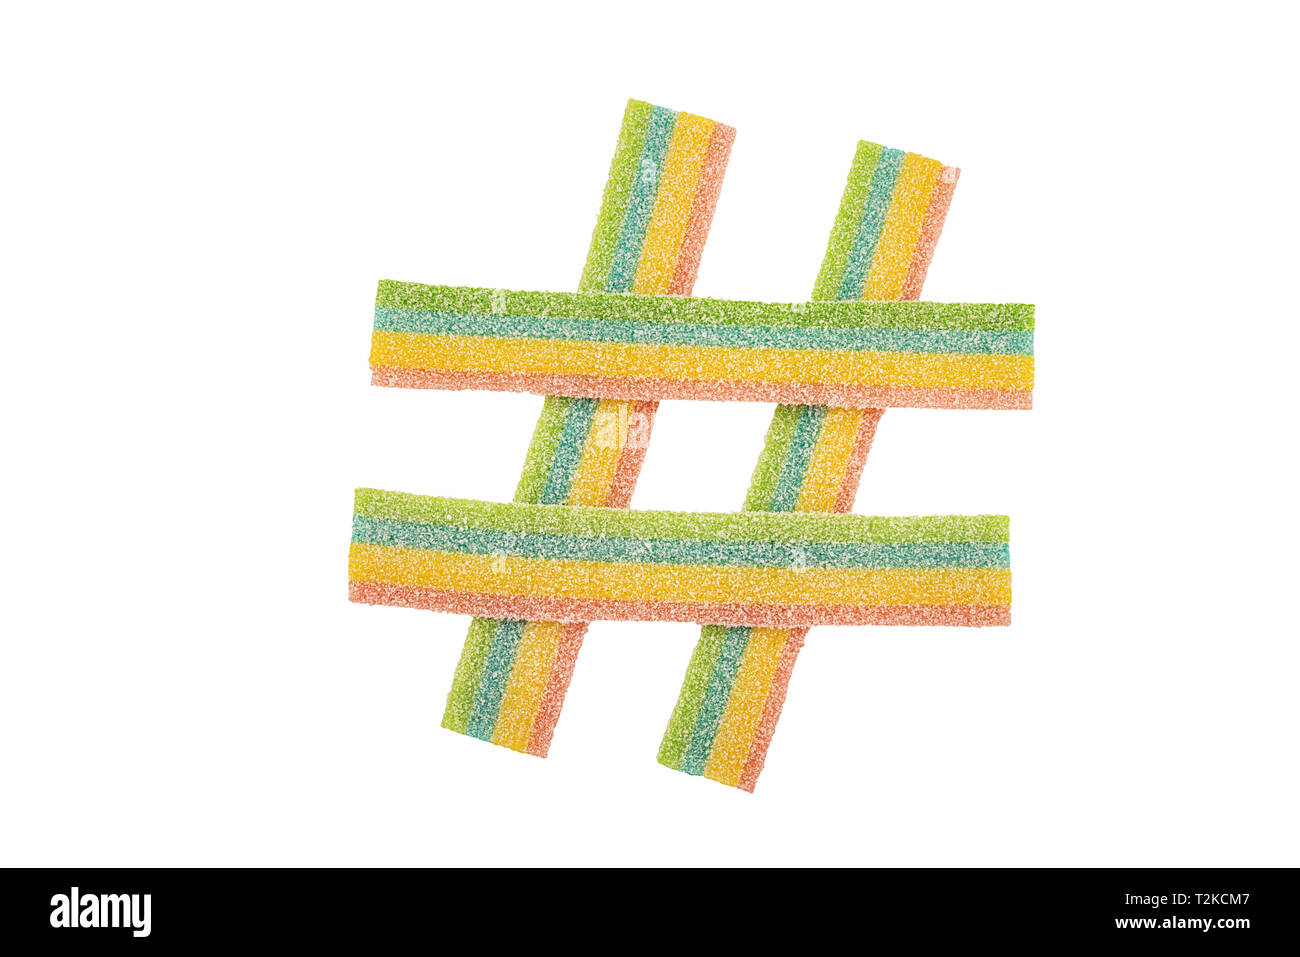 Colorful candy hashtag symbol isolated on white background. Top view. Stock Photo